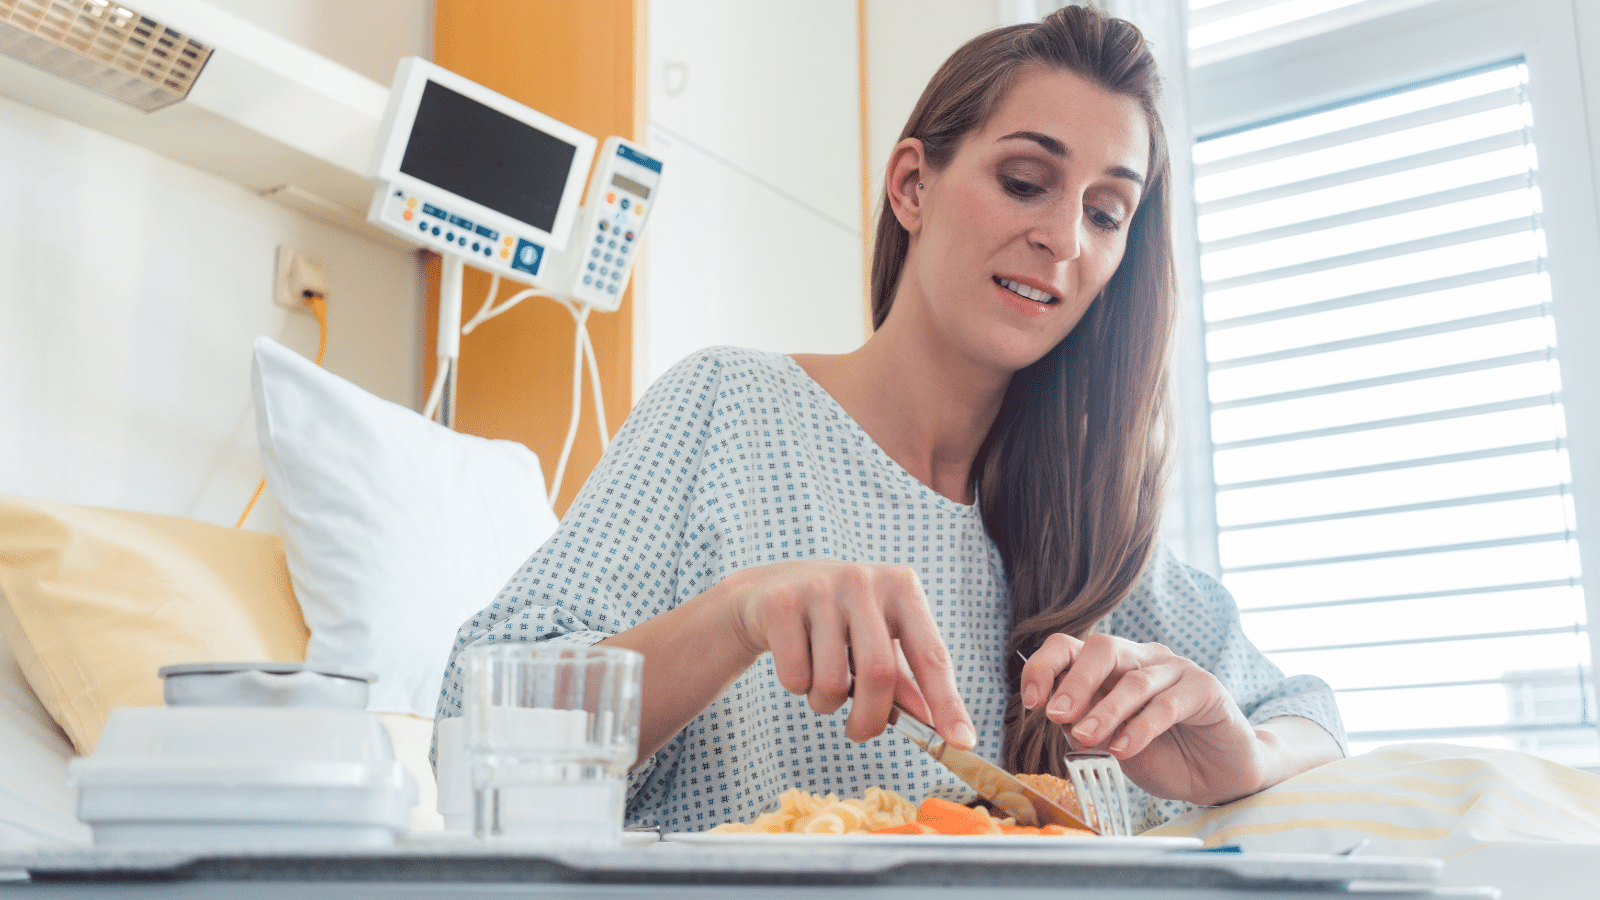 Women in the hospital eating 